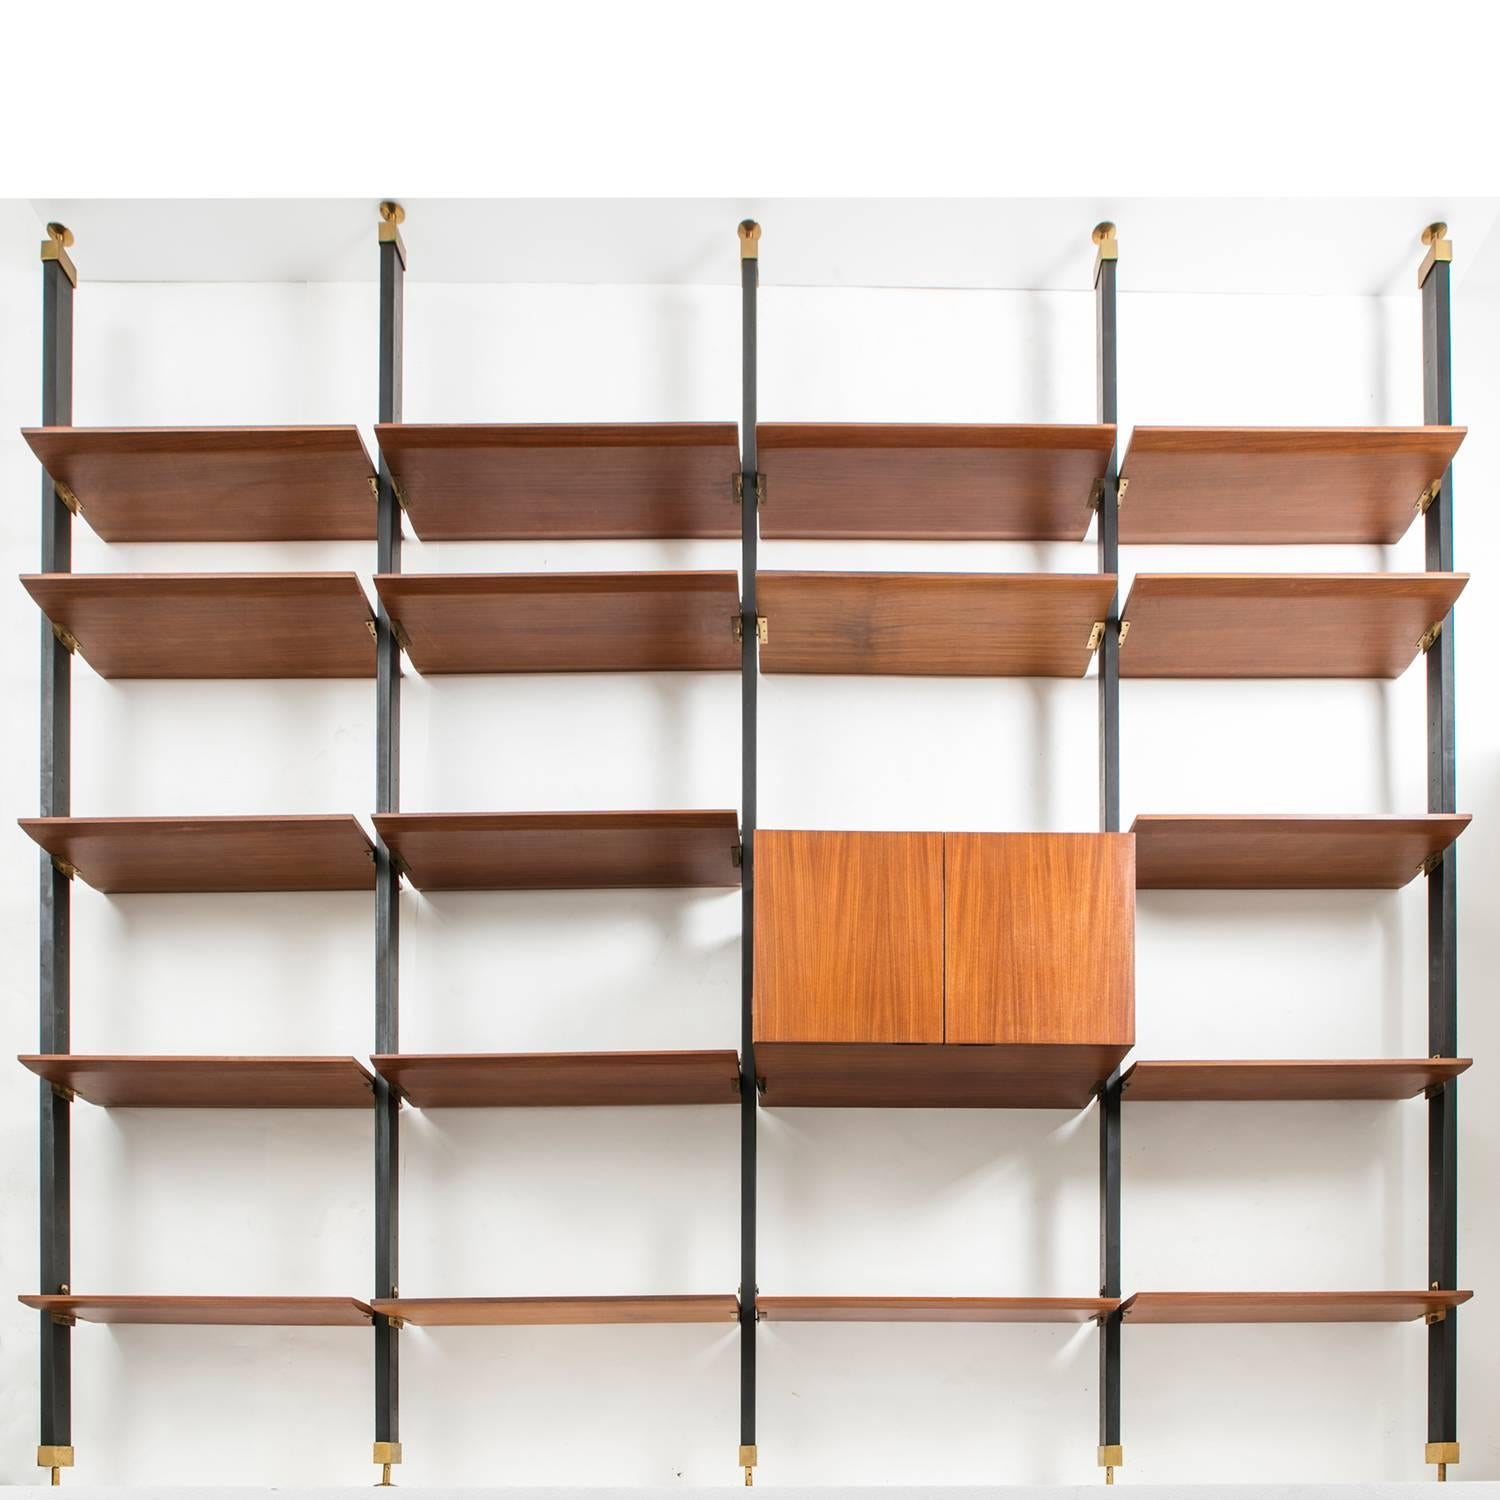 Remarkable Italian 1950s bookcase composed by nine uprights and wood shelves with brass details.